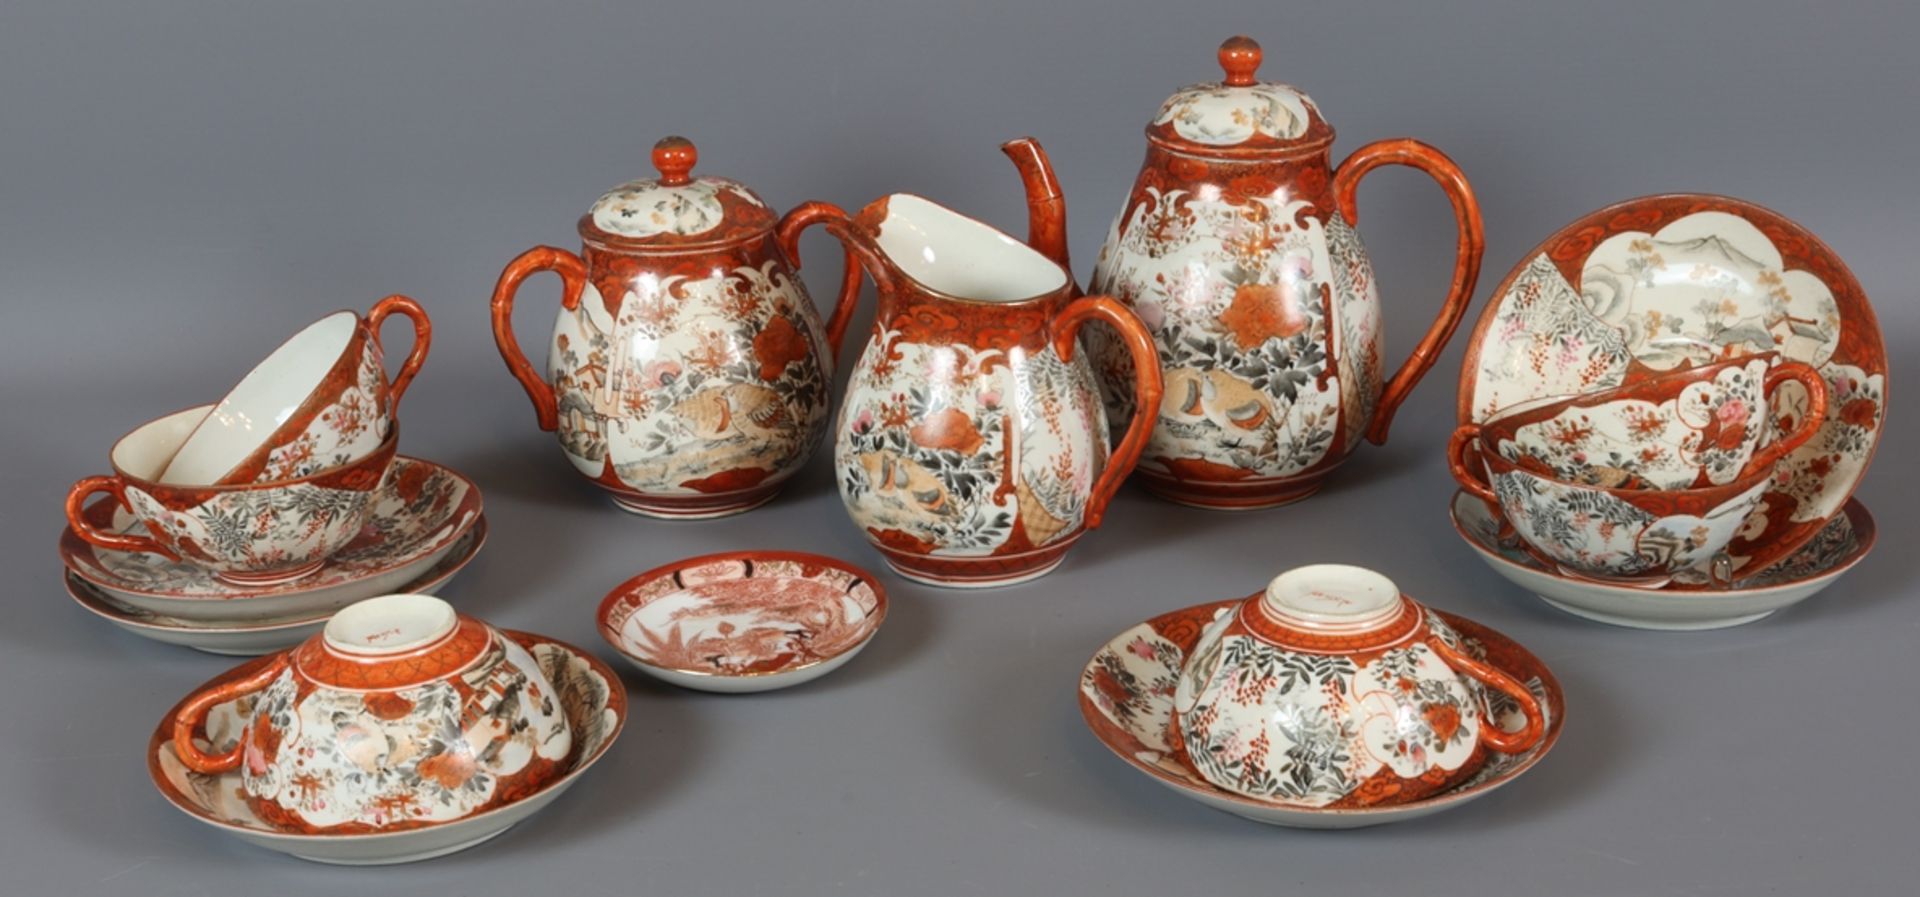 Asian tea service for 6 persons, China circa 1900